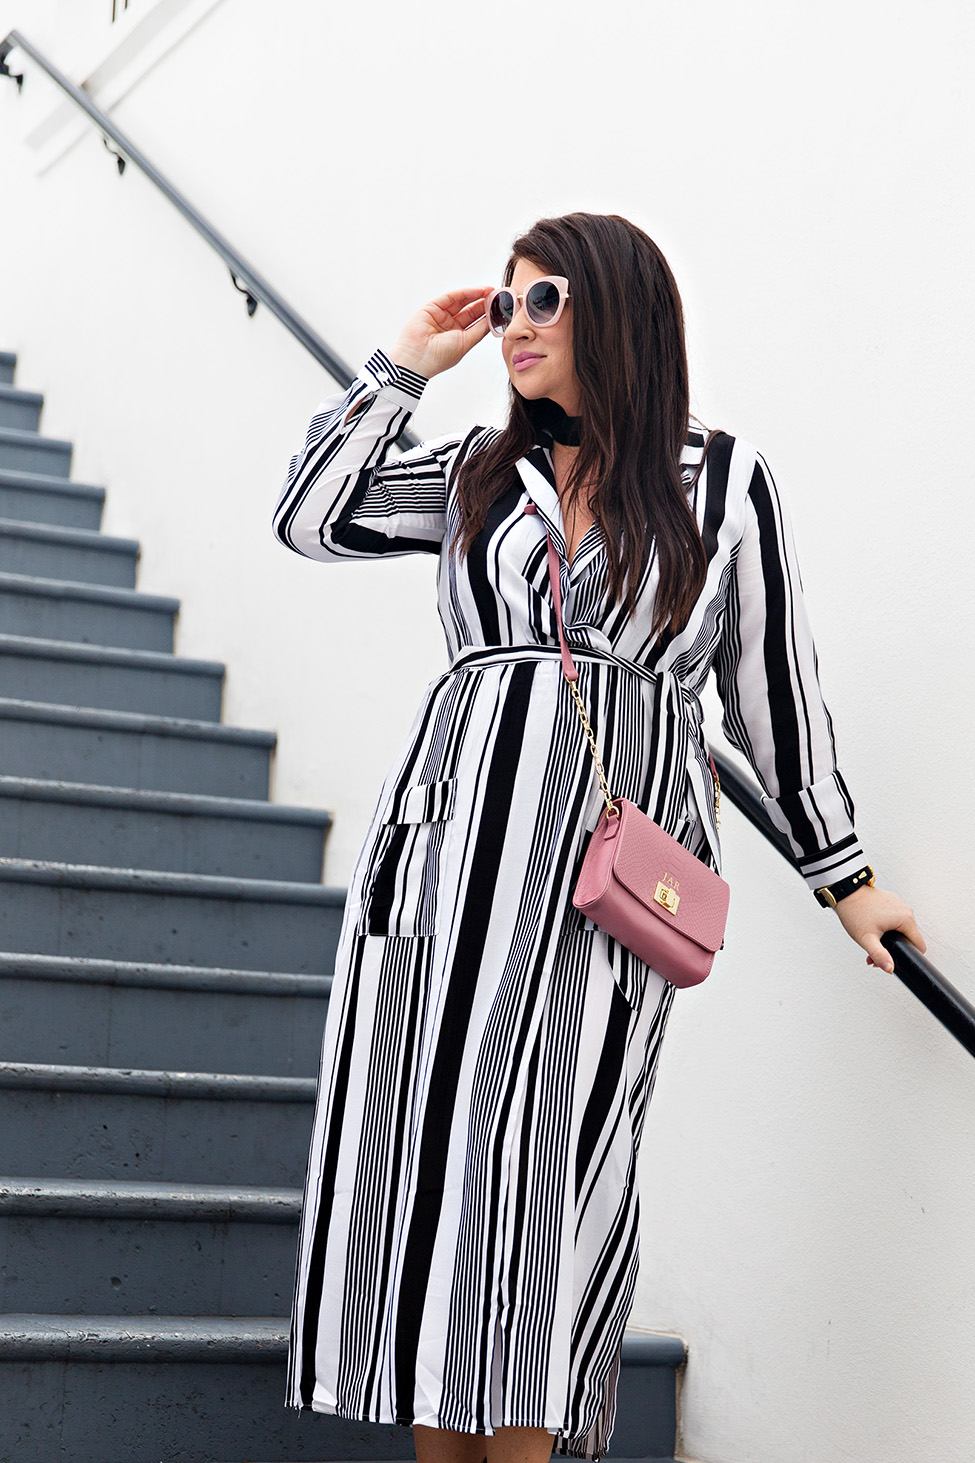 30A Street Style Jami Ray The Pearl Rosemary Beach Black and White Stripes 2